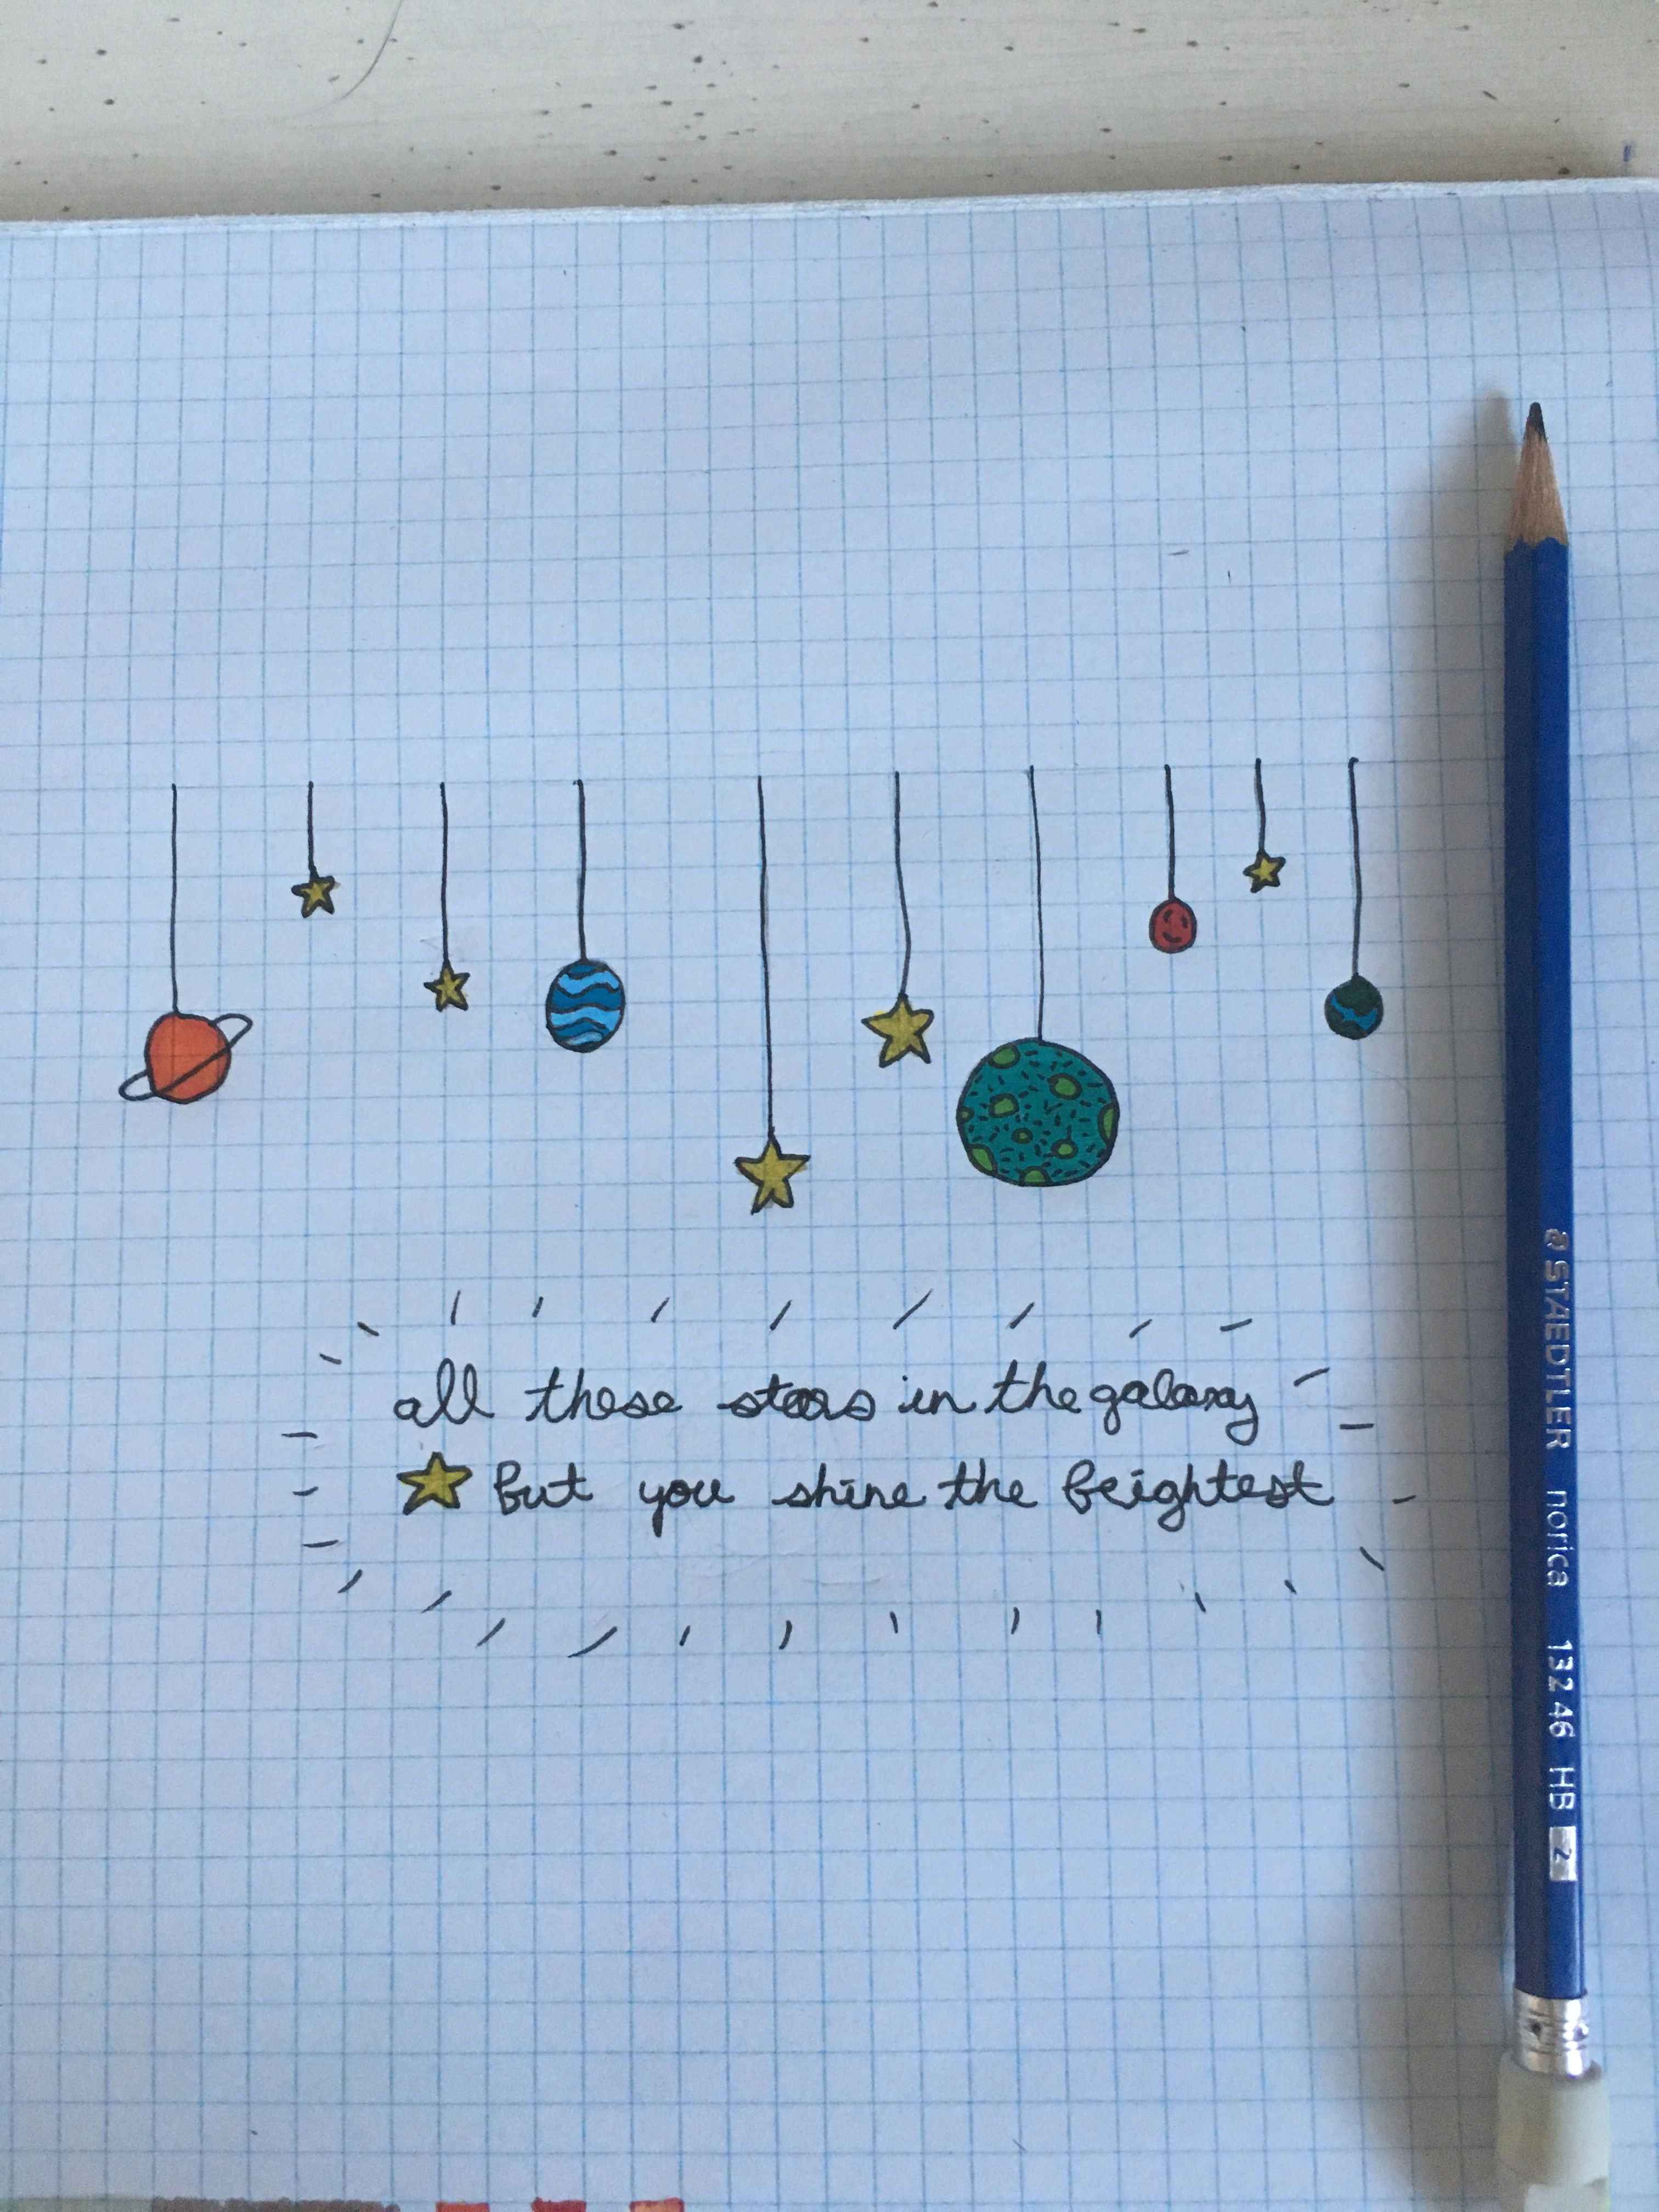 Drawing Ideas Planets I Drew some Planet and Decided to Add some Words at the Bottom I